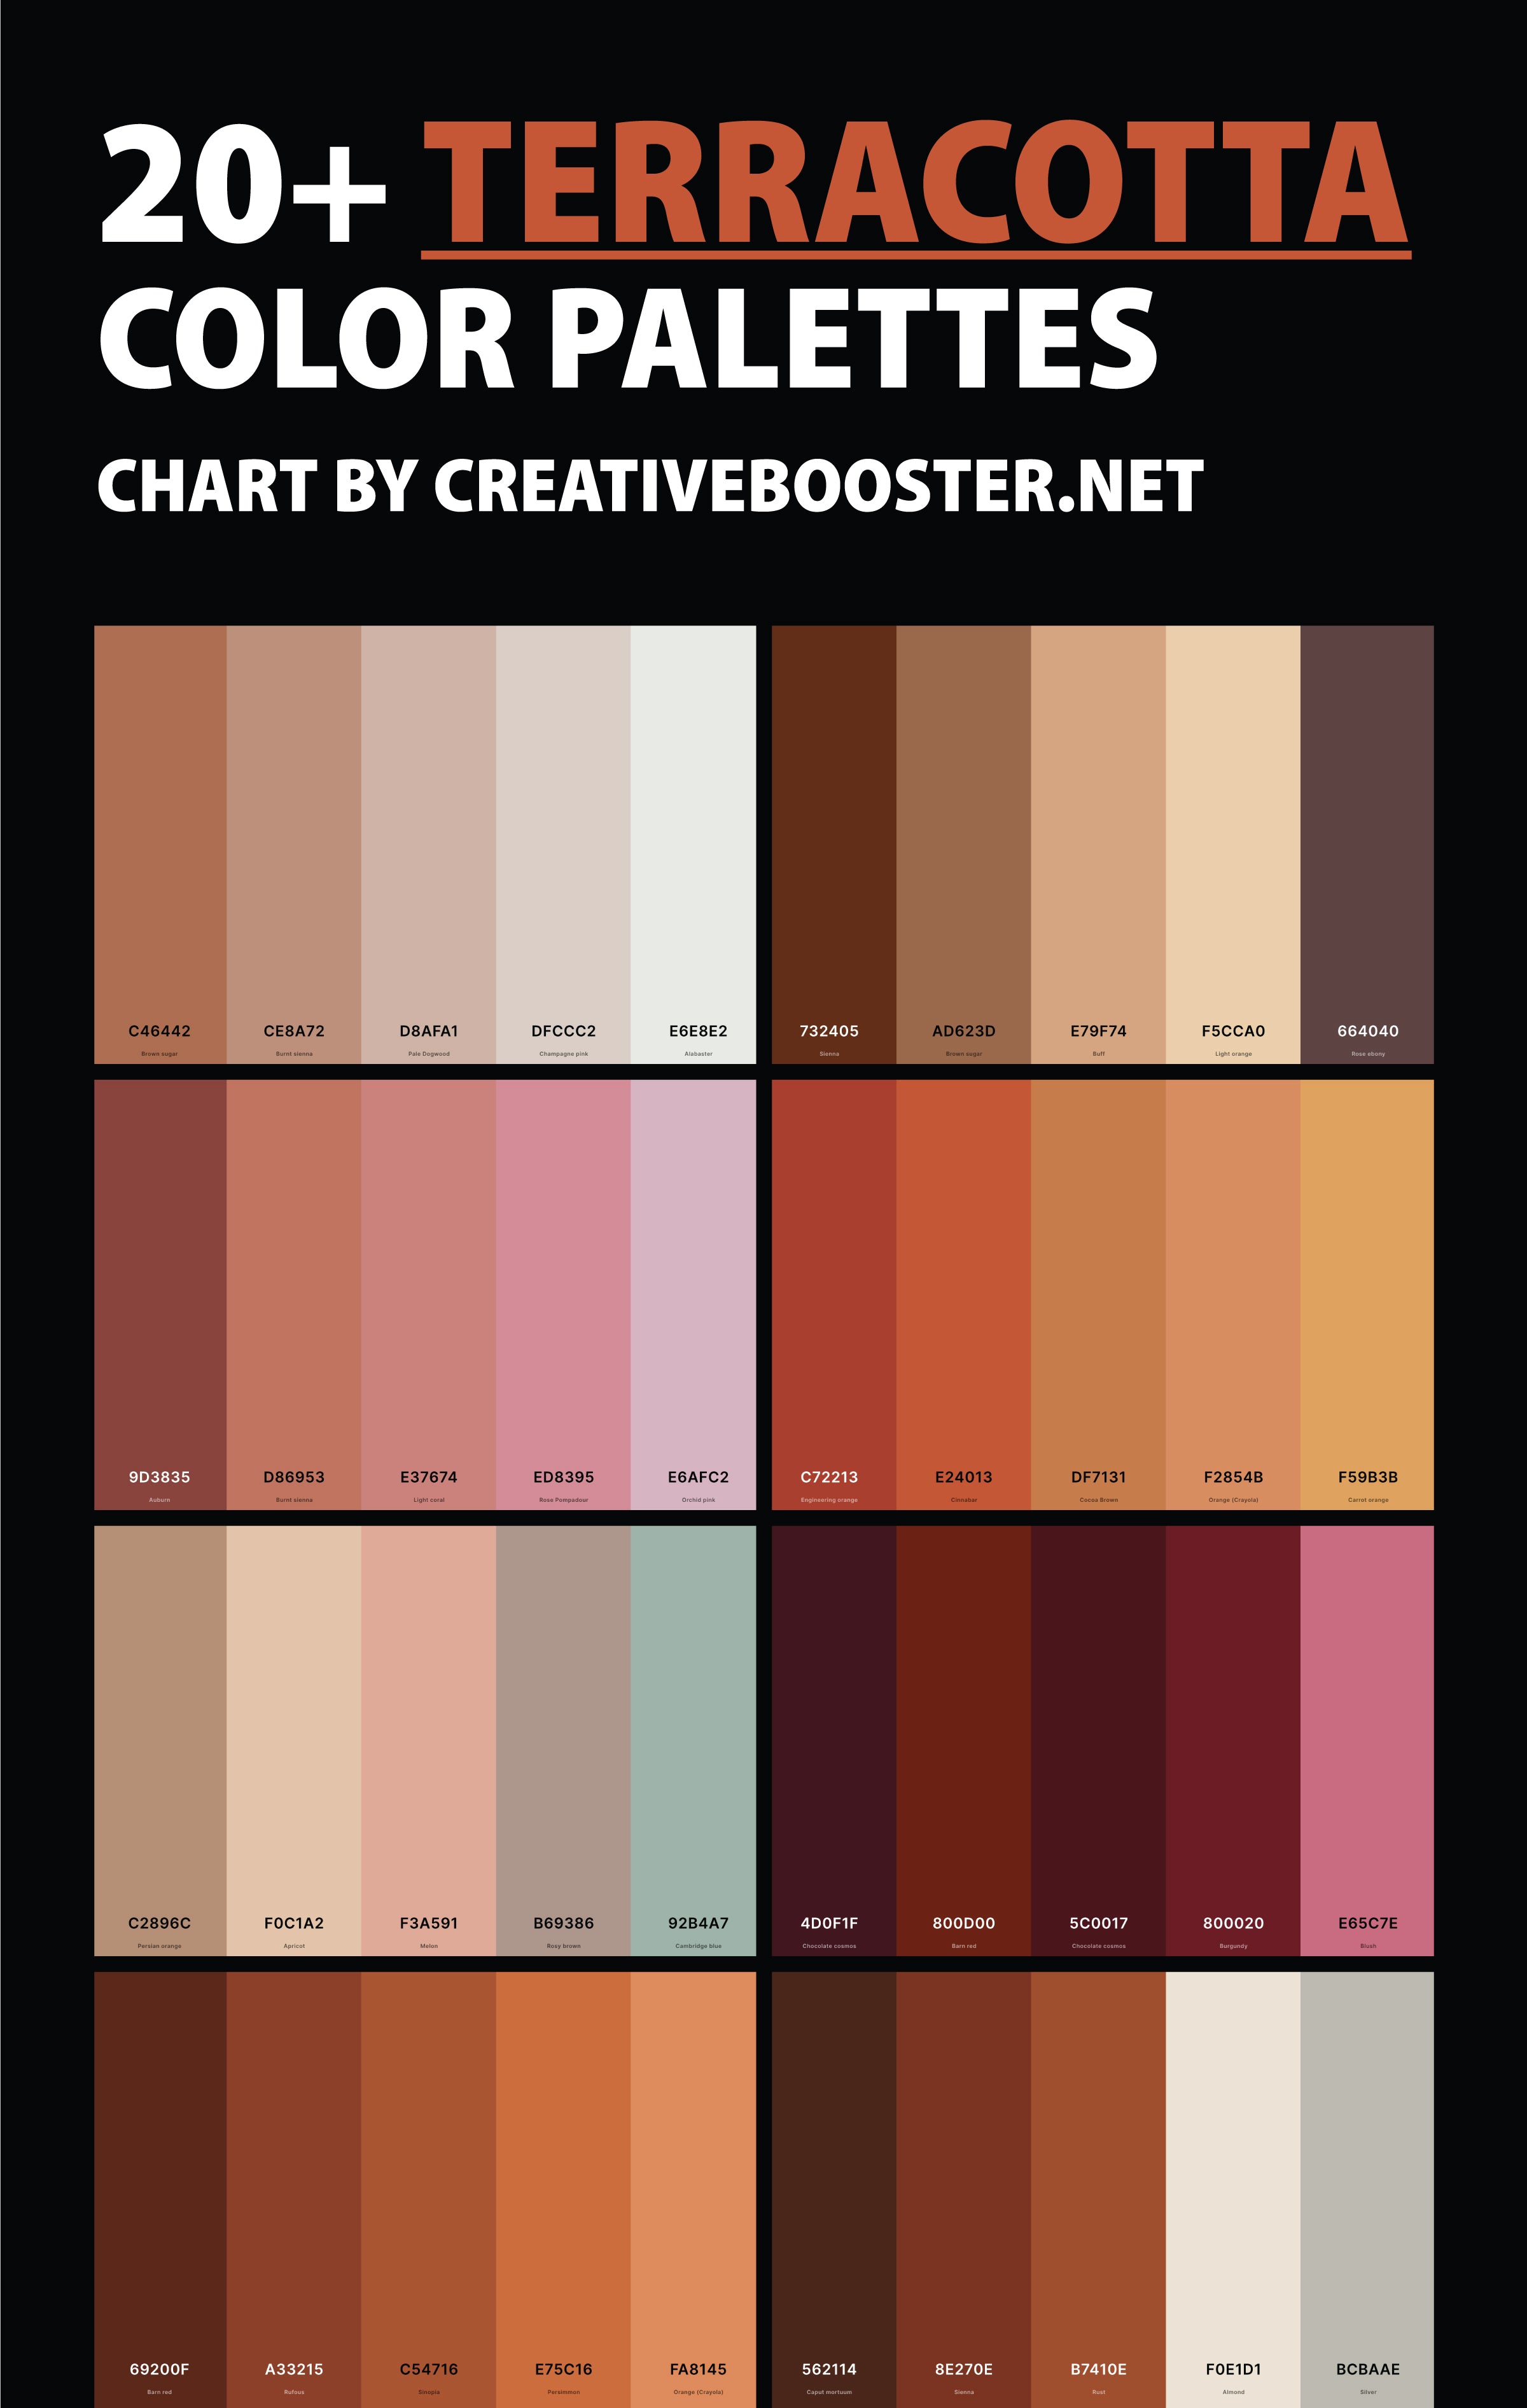 terracotta-color-palettes-chart-with-names-and-hex-codes-pinterest